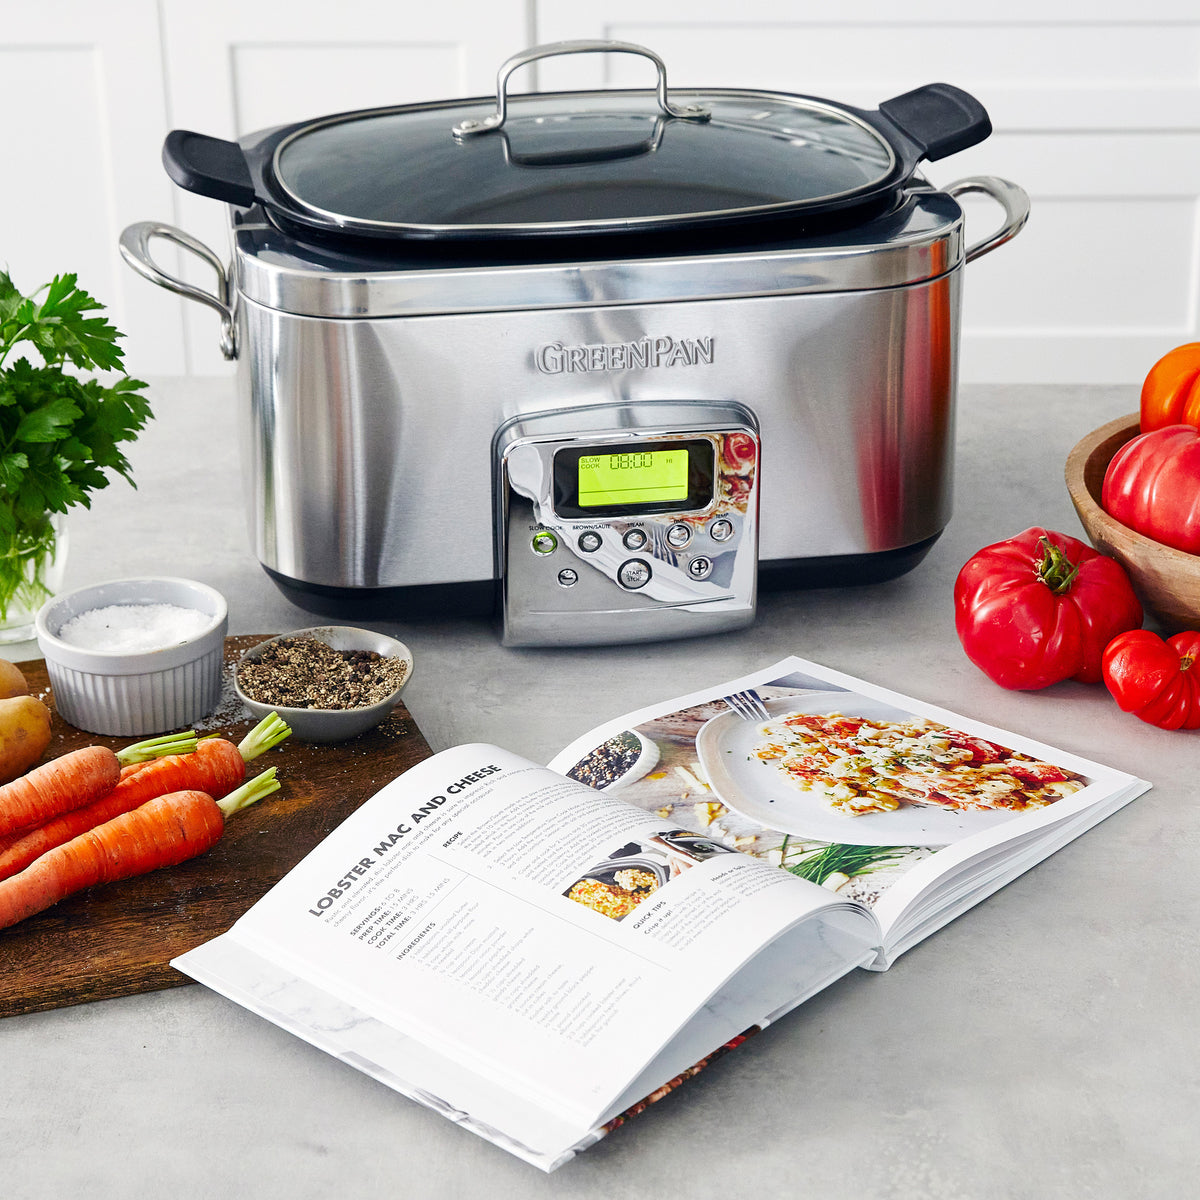 Prepare Healthy Meals with the GreenPan Elite Non Toxic Slow Cooker, pictured on a kitchen counter near an open cookbook and assorted vegetables